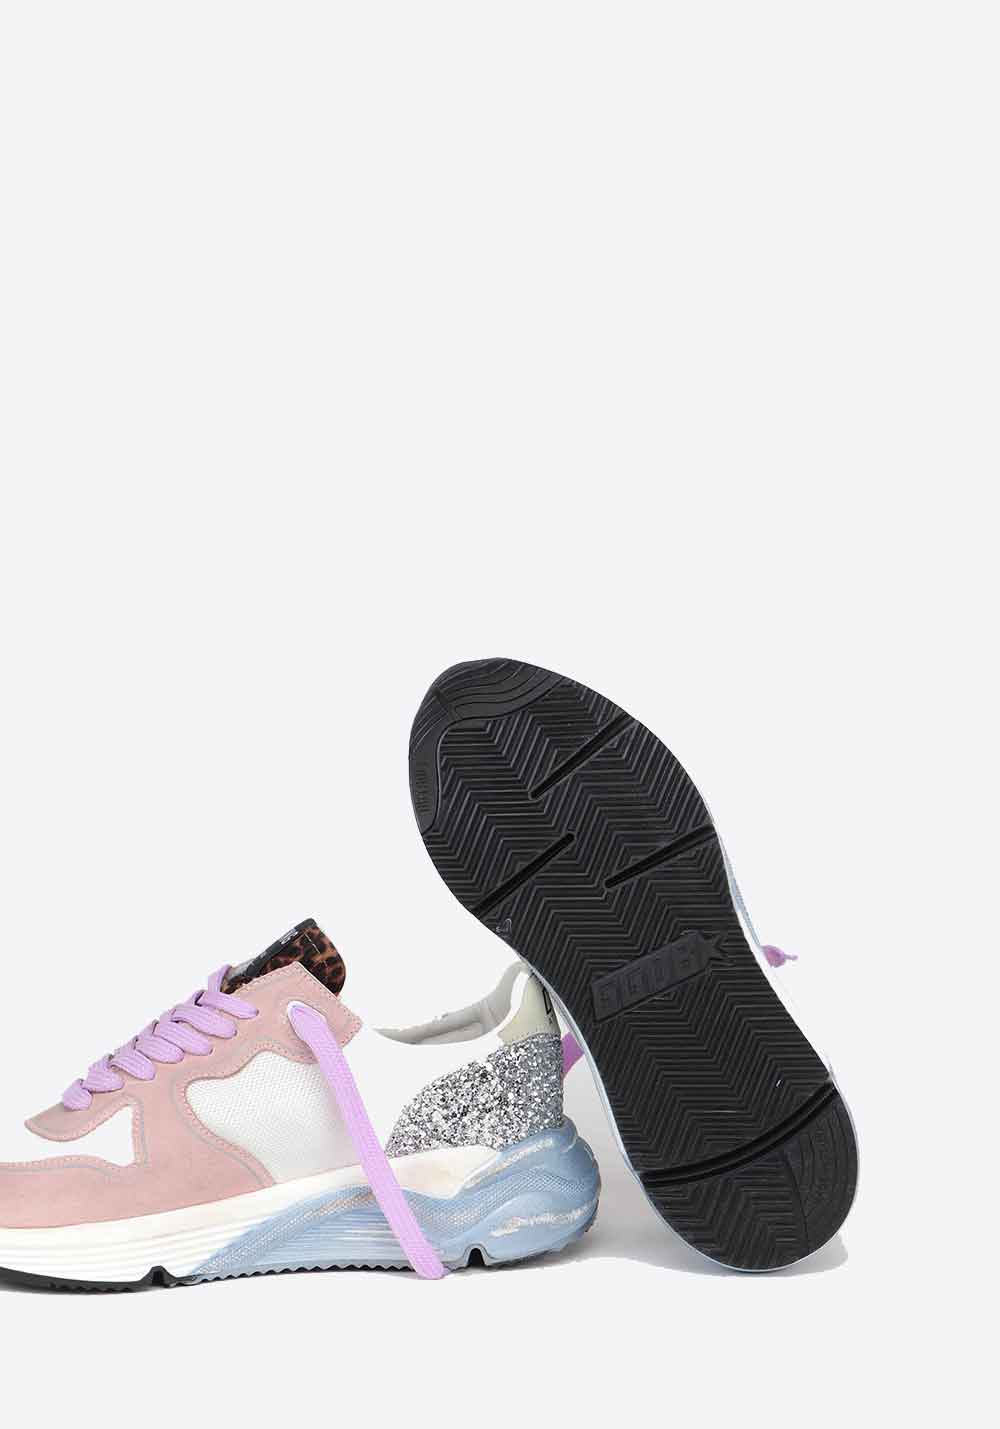 Running Sole White/Pink/Silver